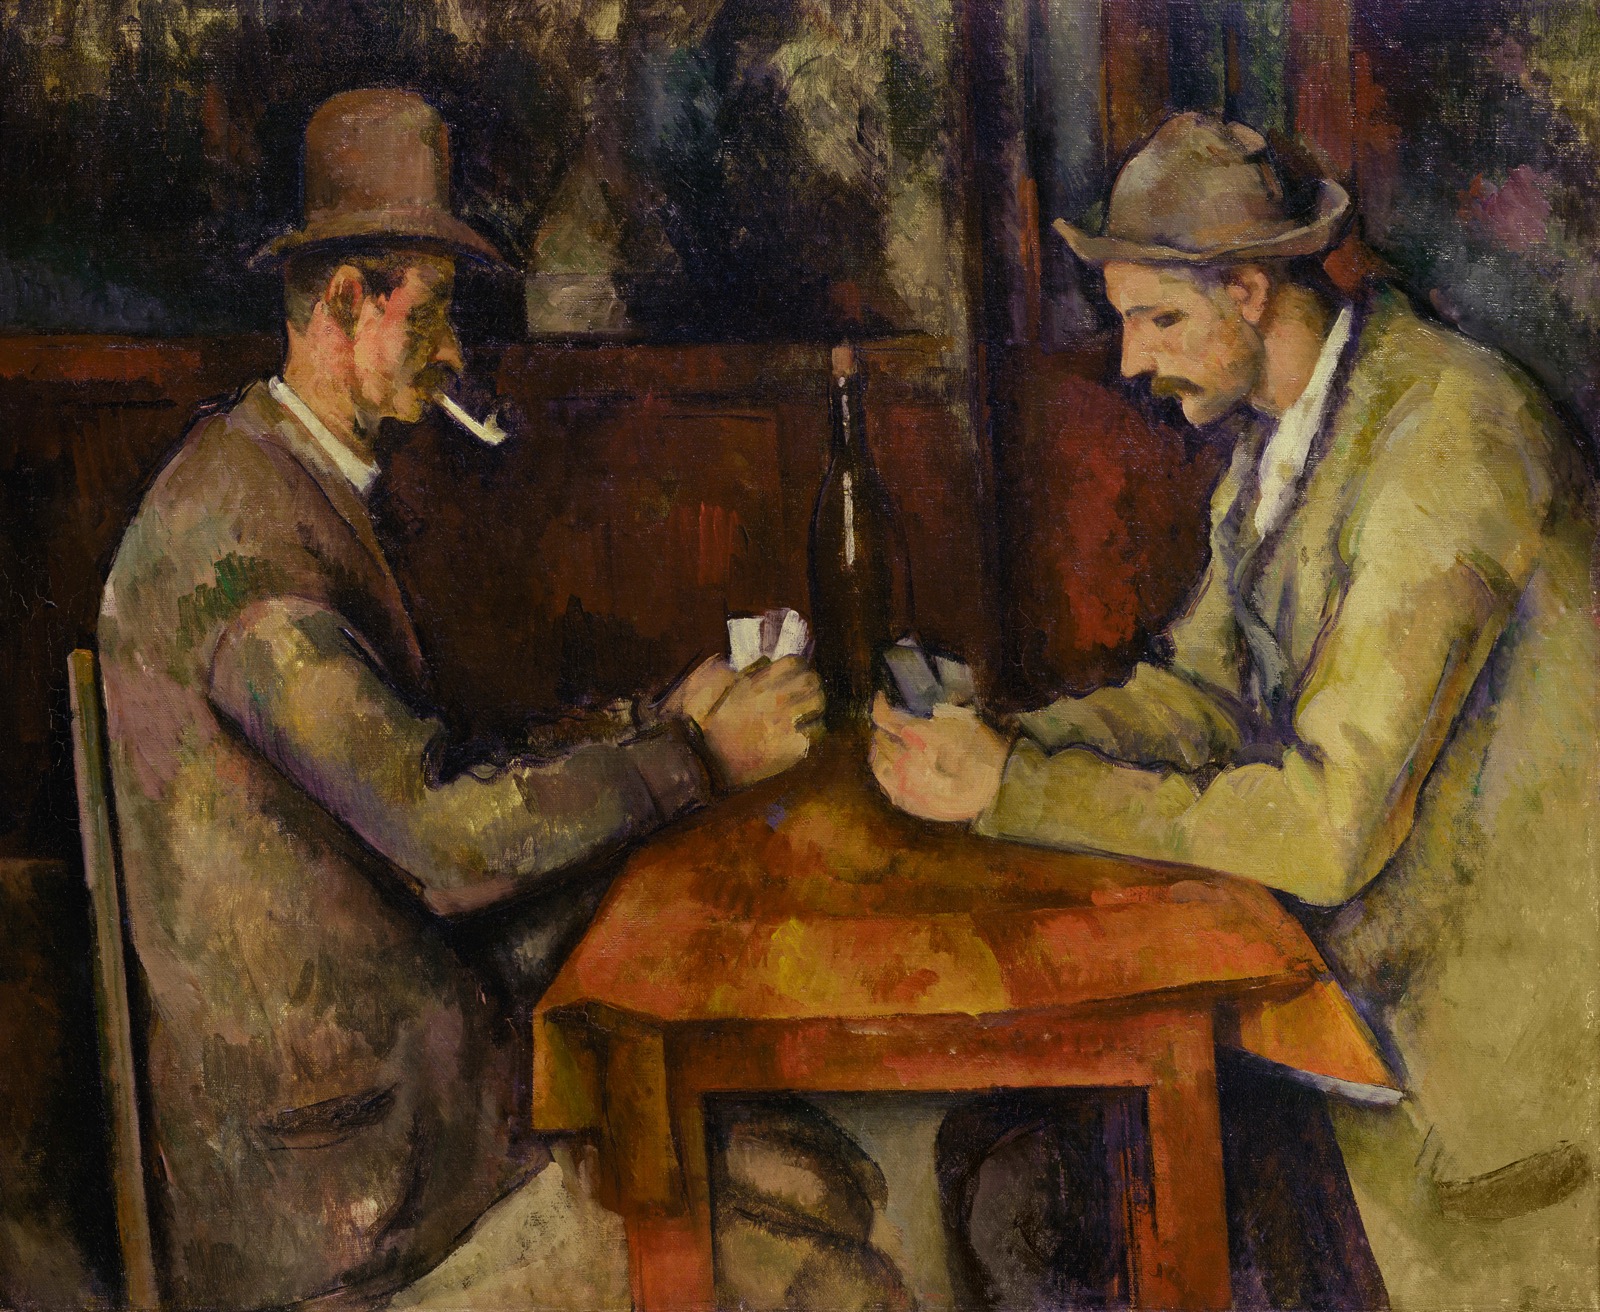 Can You Match These Famous Paintings to Their Legendary Creators? The Card Players, 1893-96 (oil on canvas)